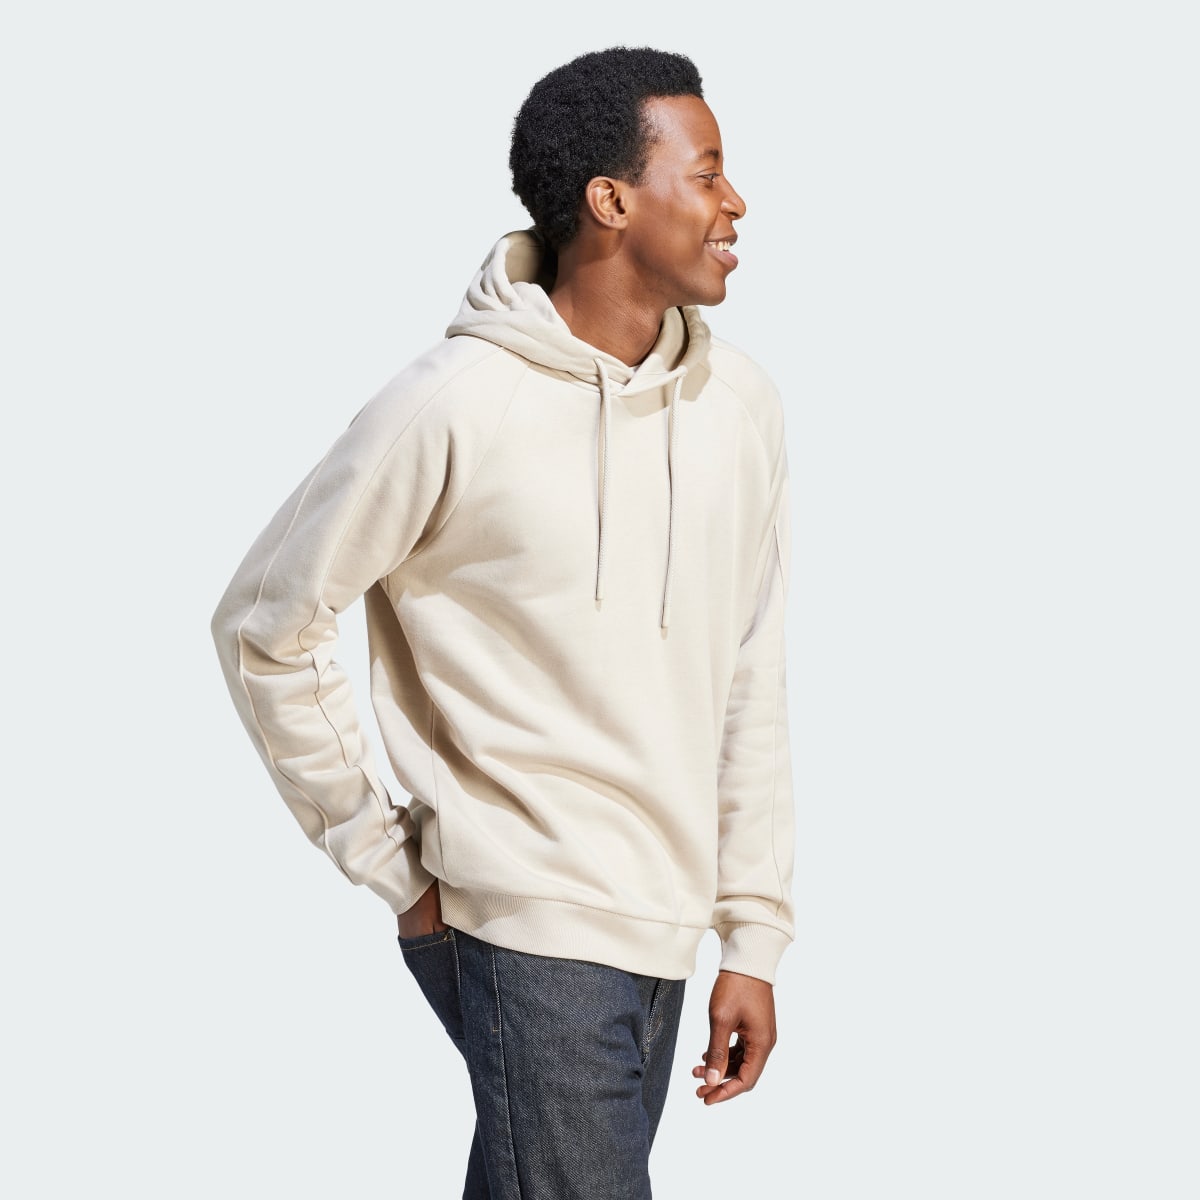 Adidas The Safe Place Hoodie. 4